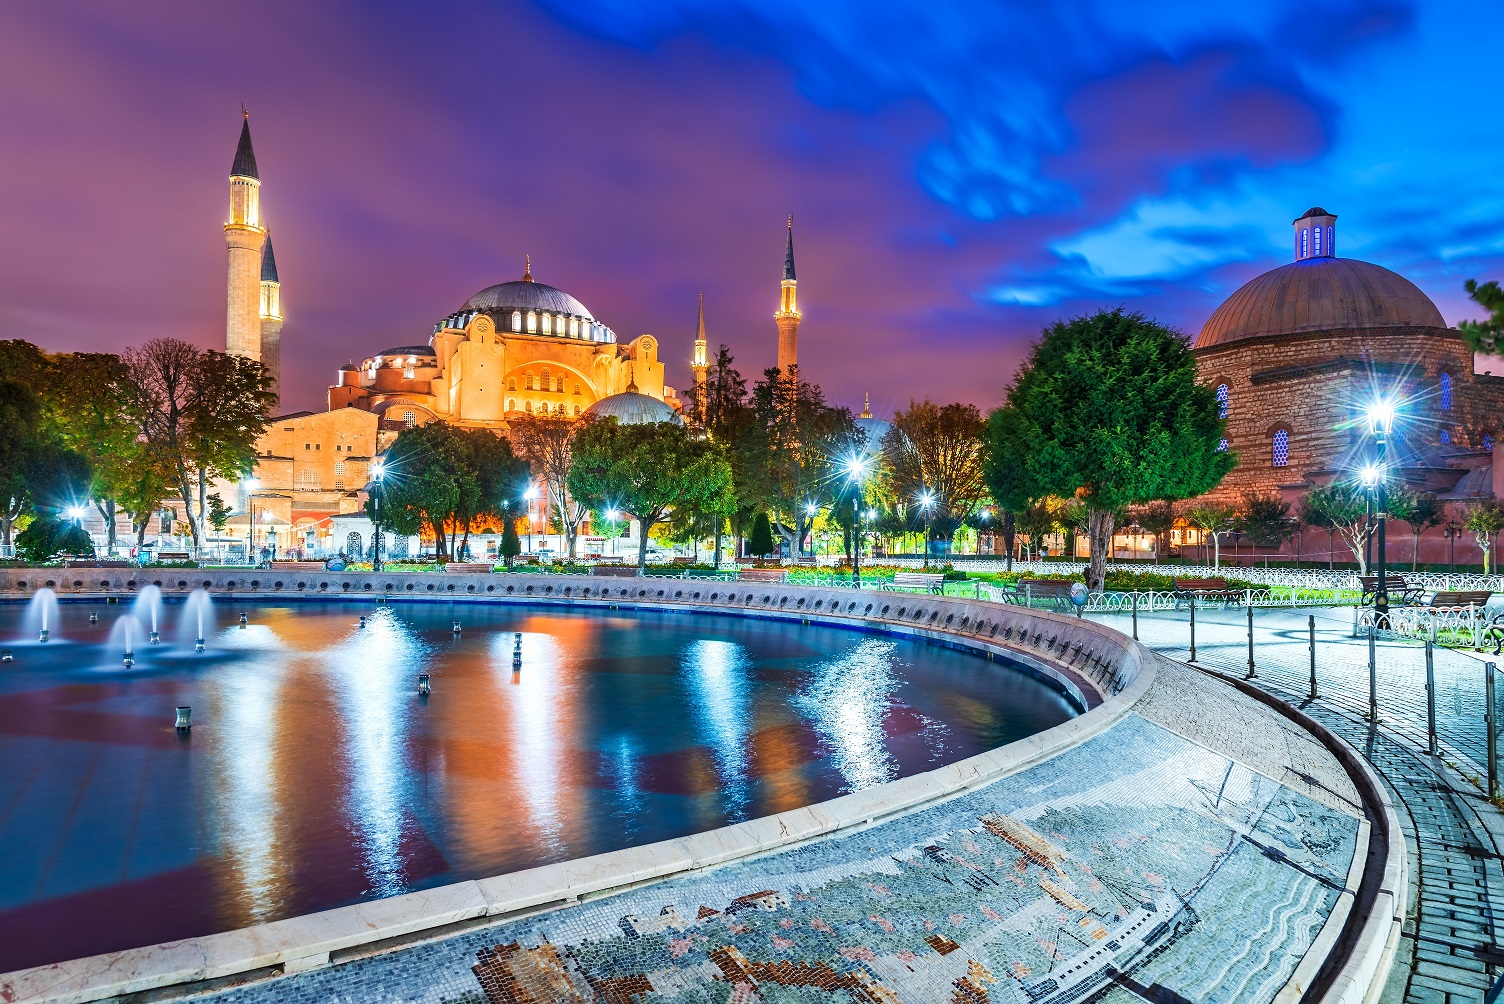 Istanbul, Turkey. Famous Hagia Sophia mosque and minarets historical Constantinople, Sultanahmet downtown, scenic travel place.